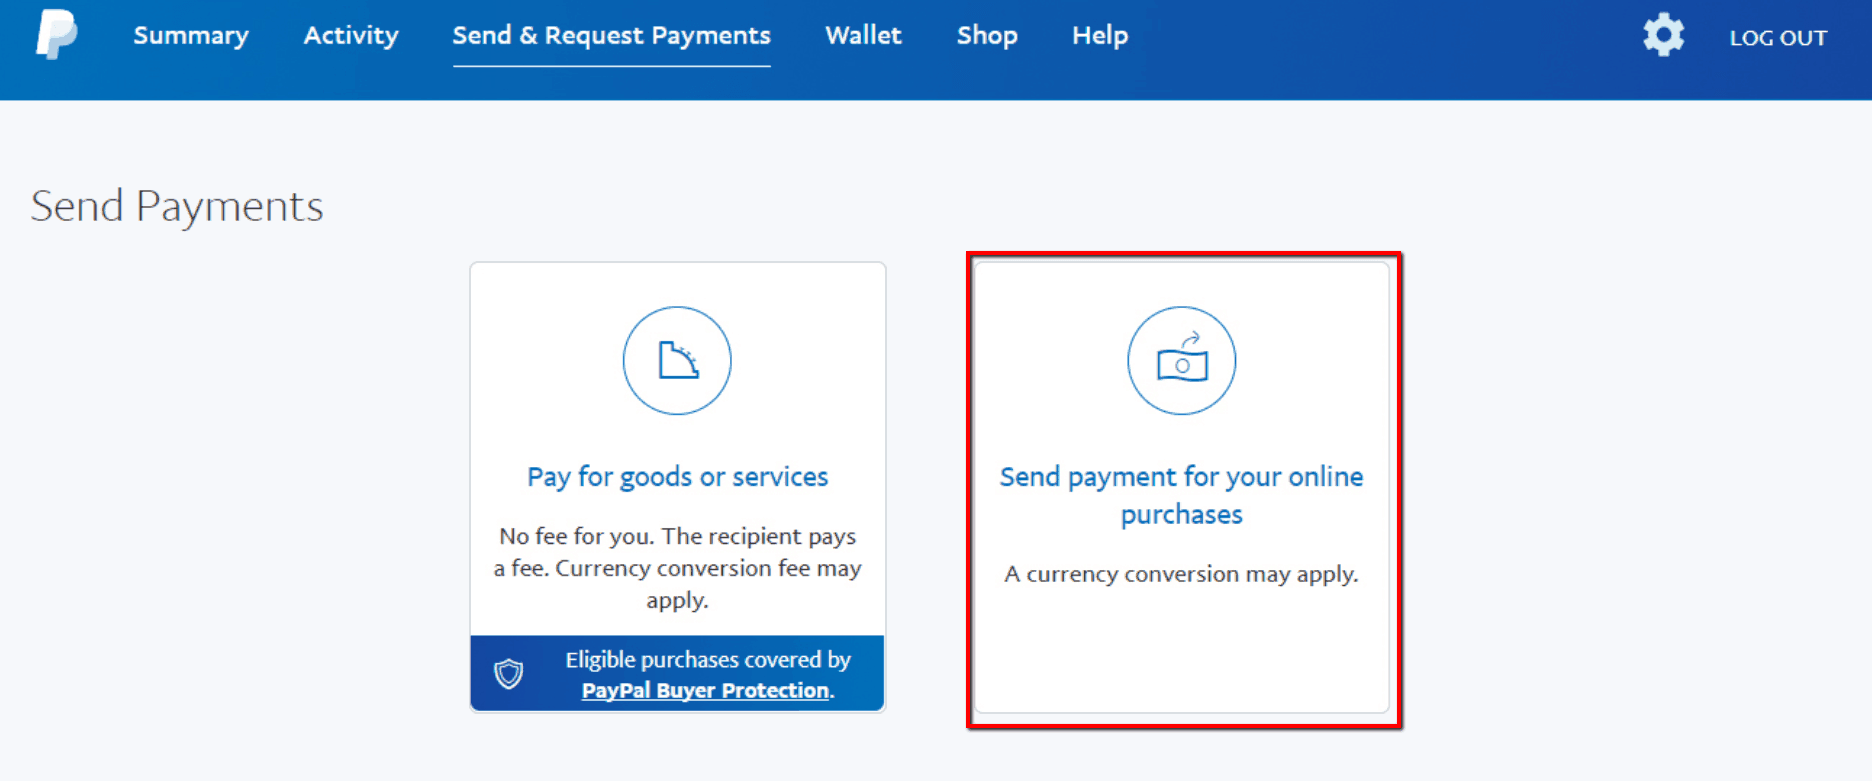 Send payment for your online purchases